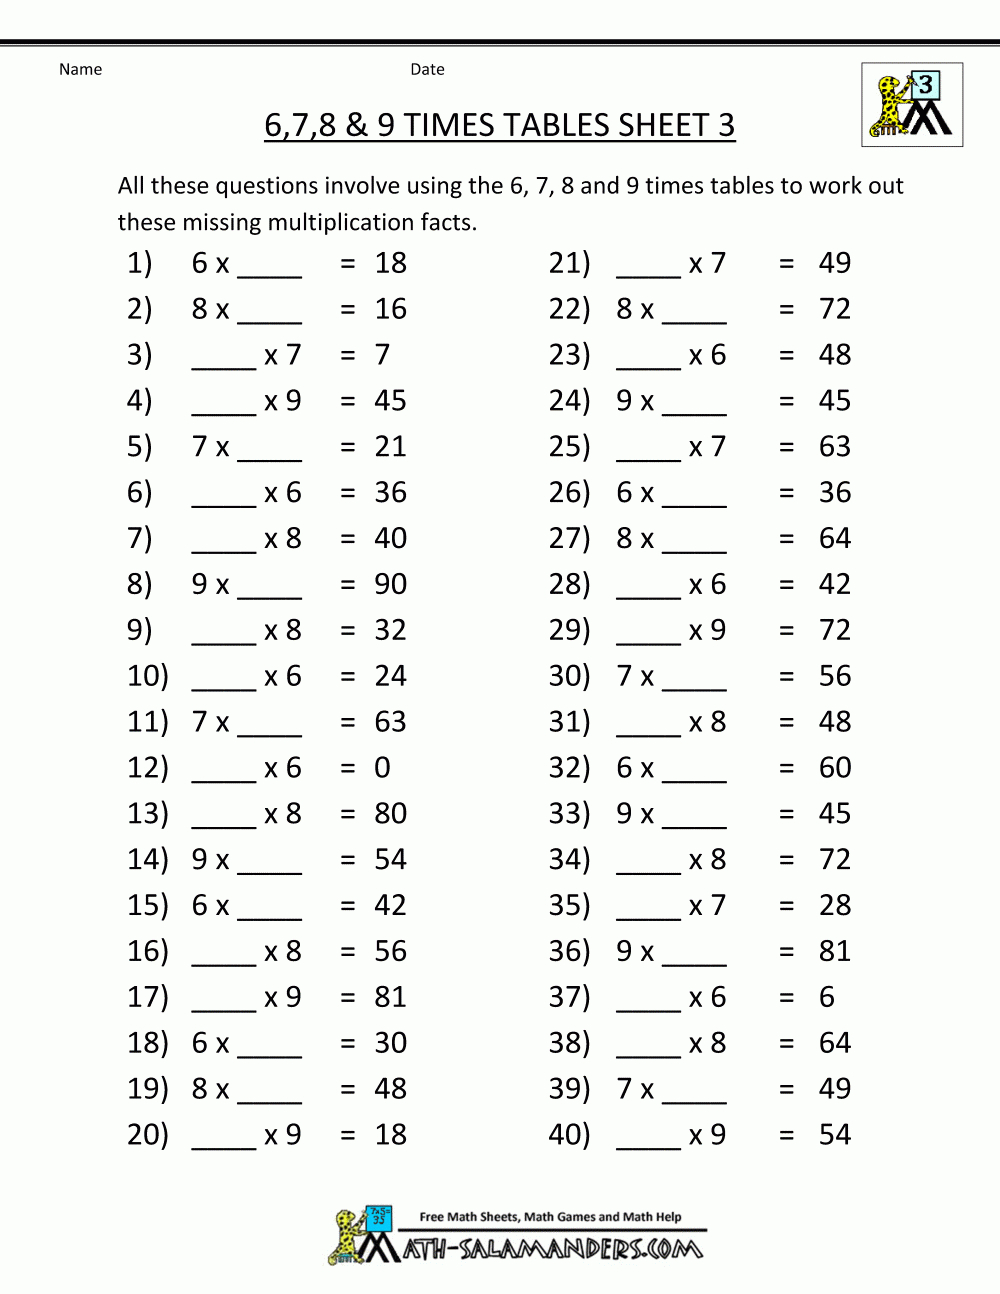 Free Multiplication Worksheets 6 7 8 9 Times Tables 3 with Multiplication Worksheets 6 7 8 9